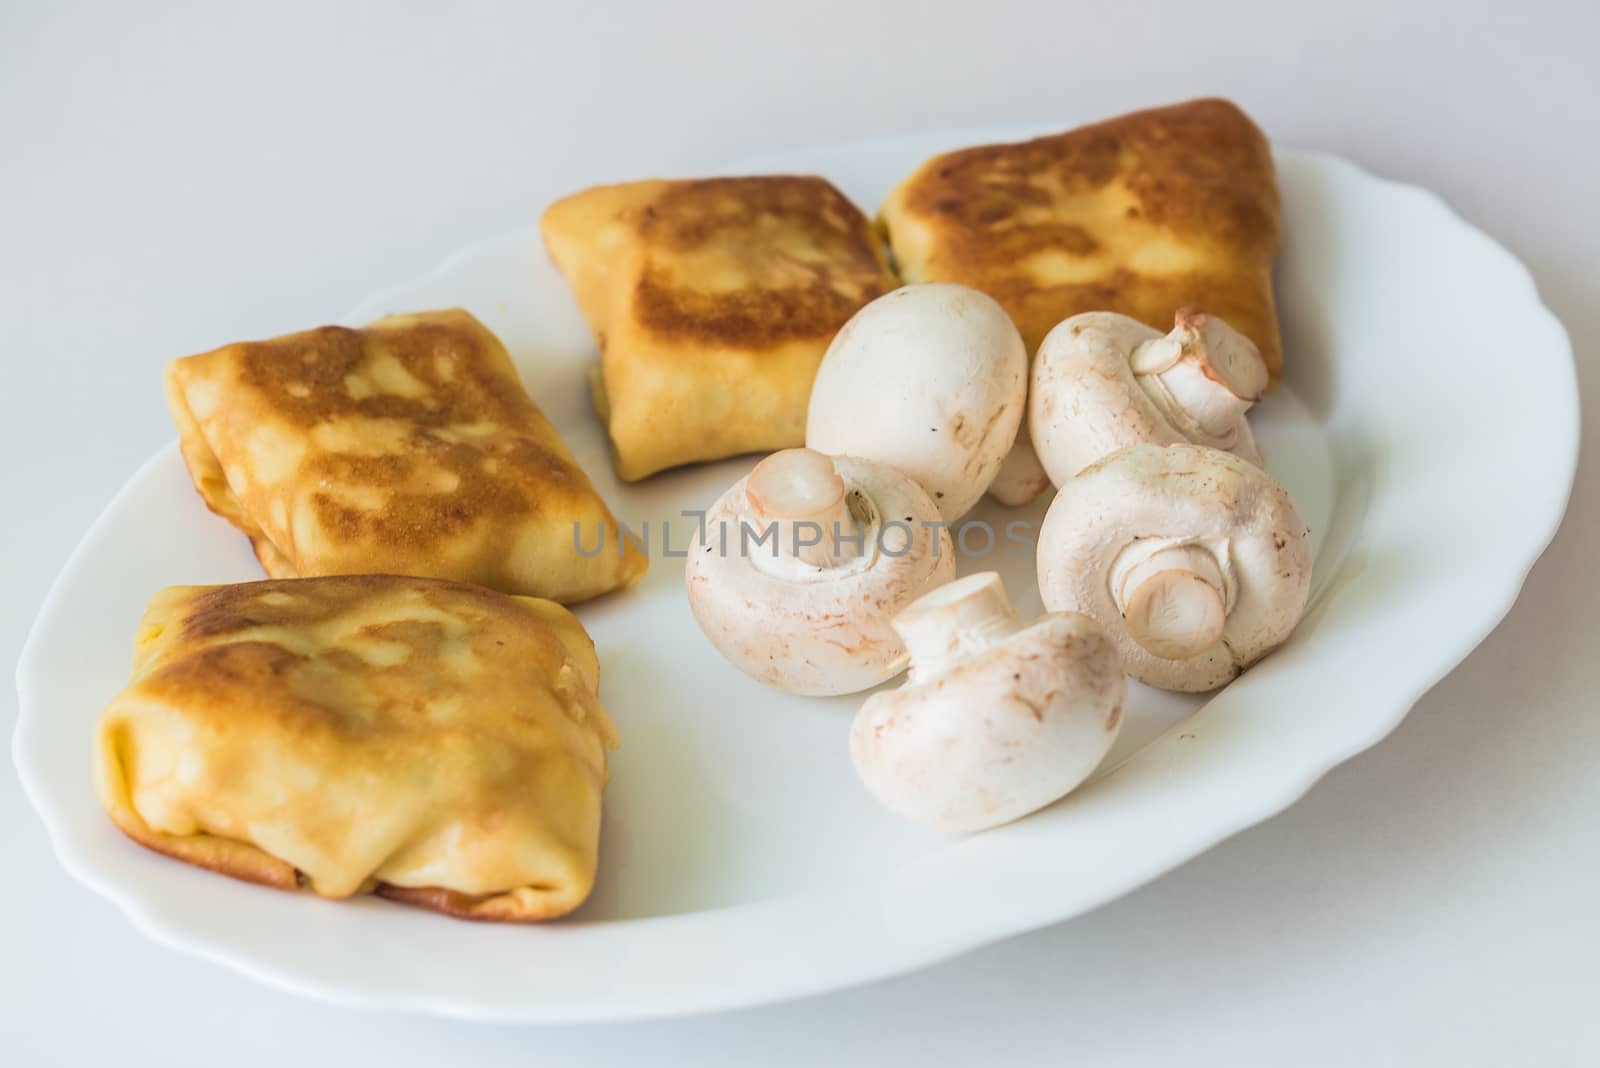 Fried pancakes with fillings and mushrooms in the white plate on a white background